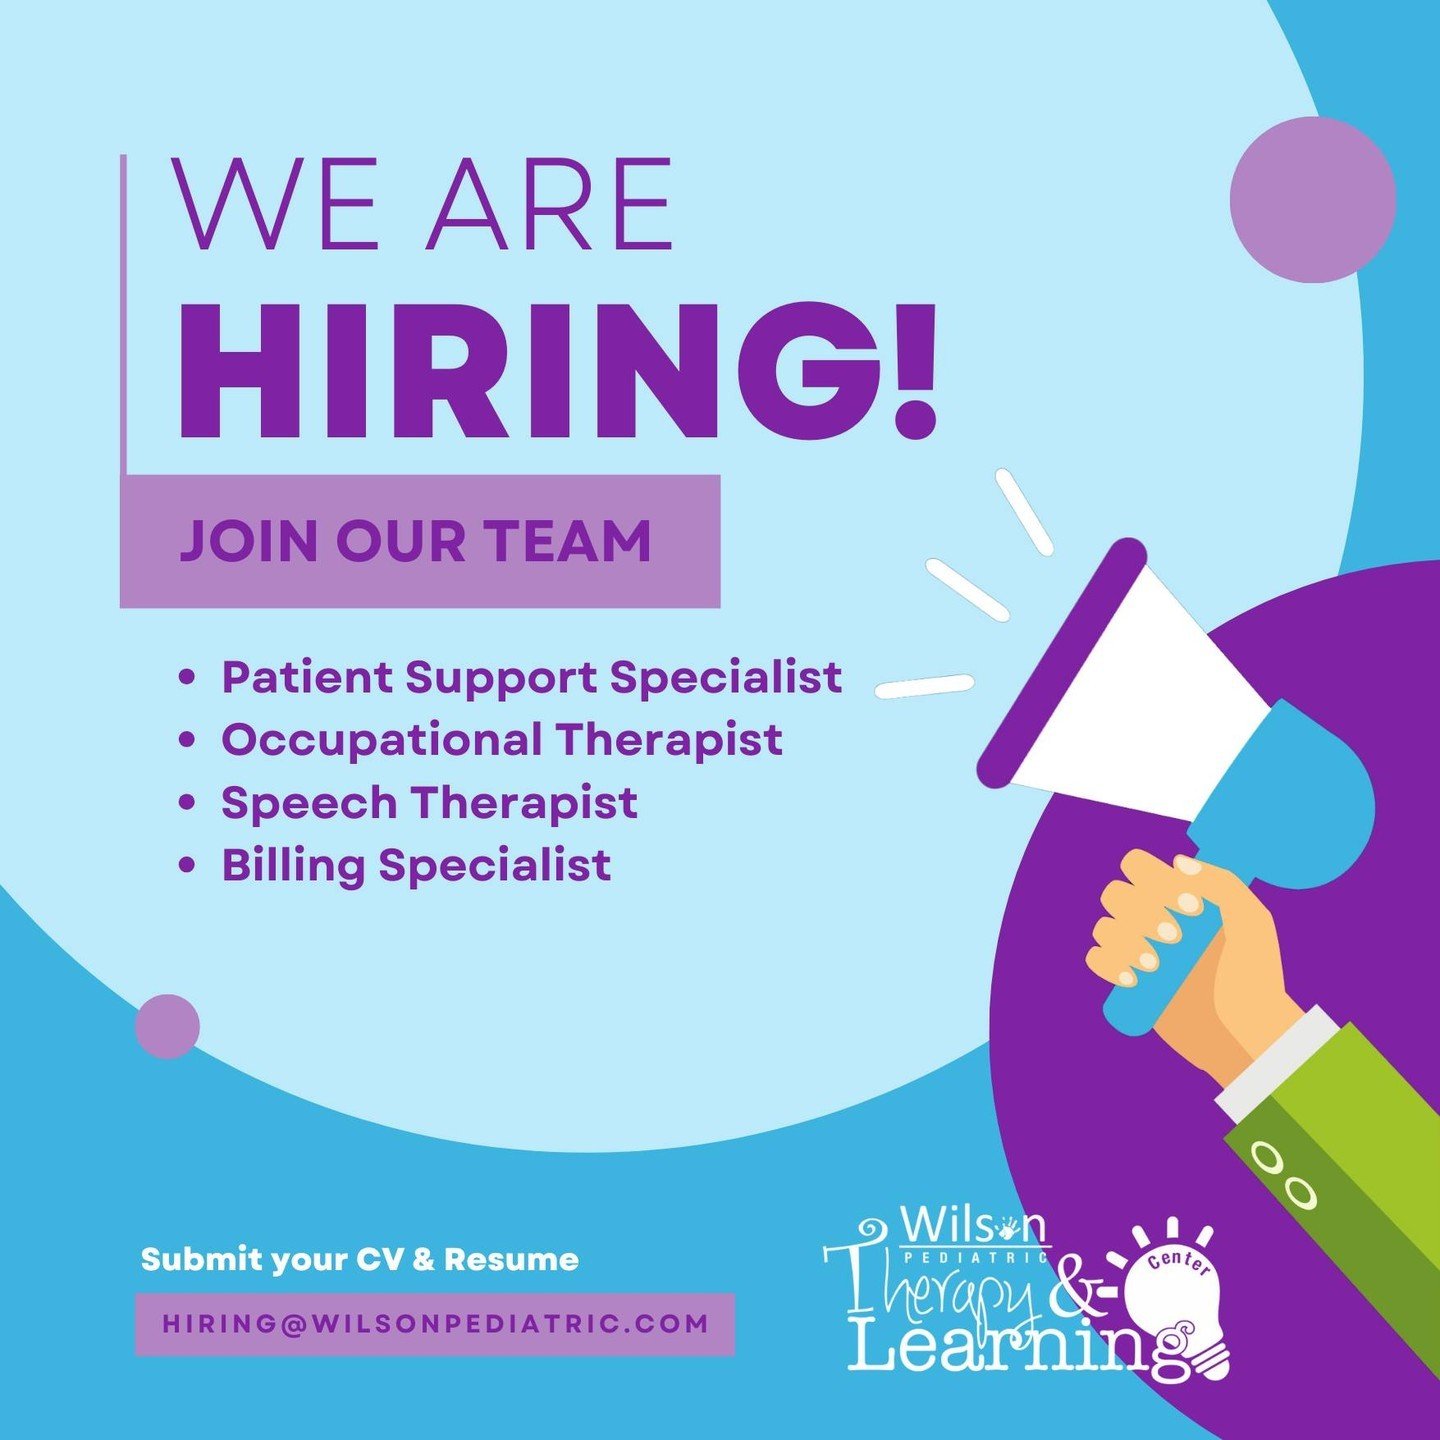 We are HIRING!!🎉 We are looking for the following roles: Occupational Therapist, Speech Therapist, Billing Specialist and Patient Support Specialist to join our WPT family!

We are passionate about what we do both in the clinic and in the community 